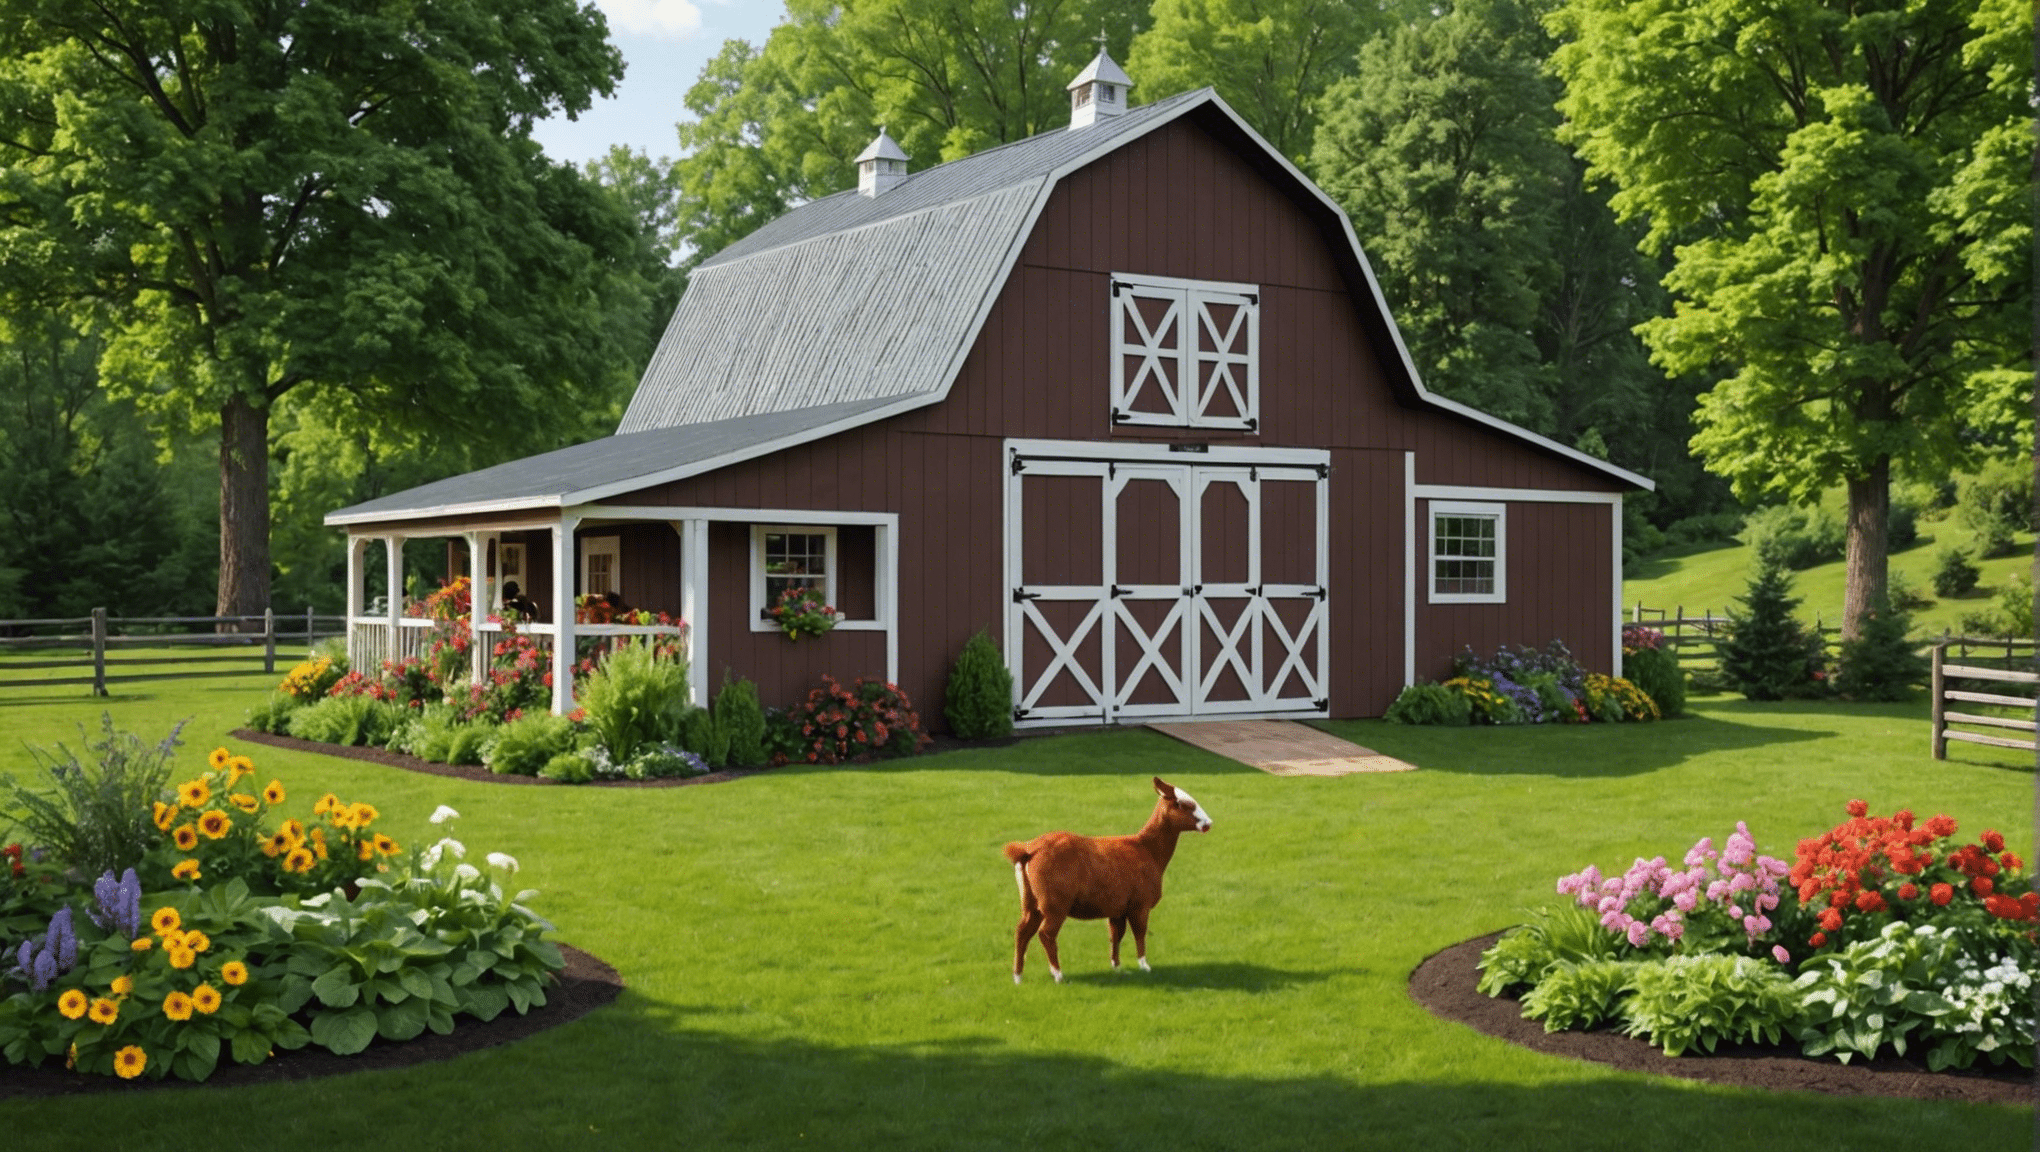 discover the advantages of raising barn animals in your backyard and the positive impact they can have on your life.